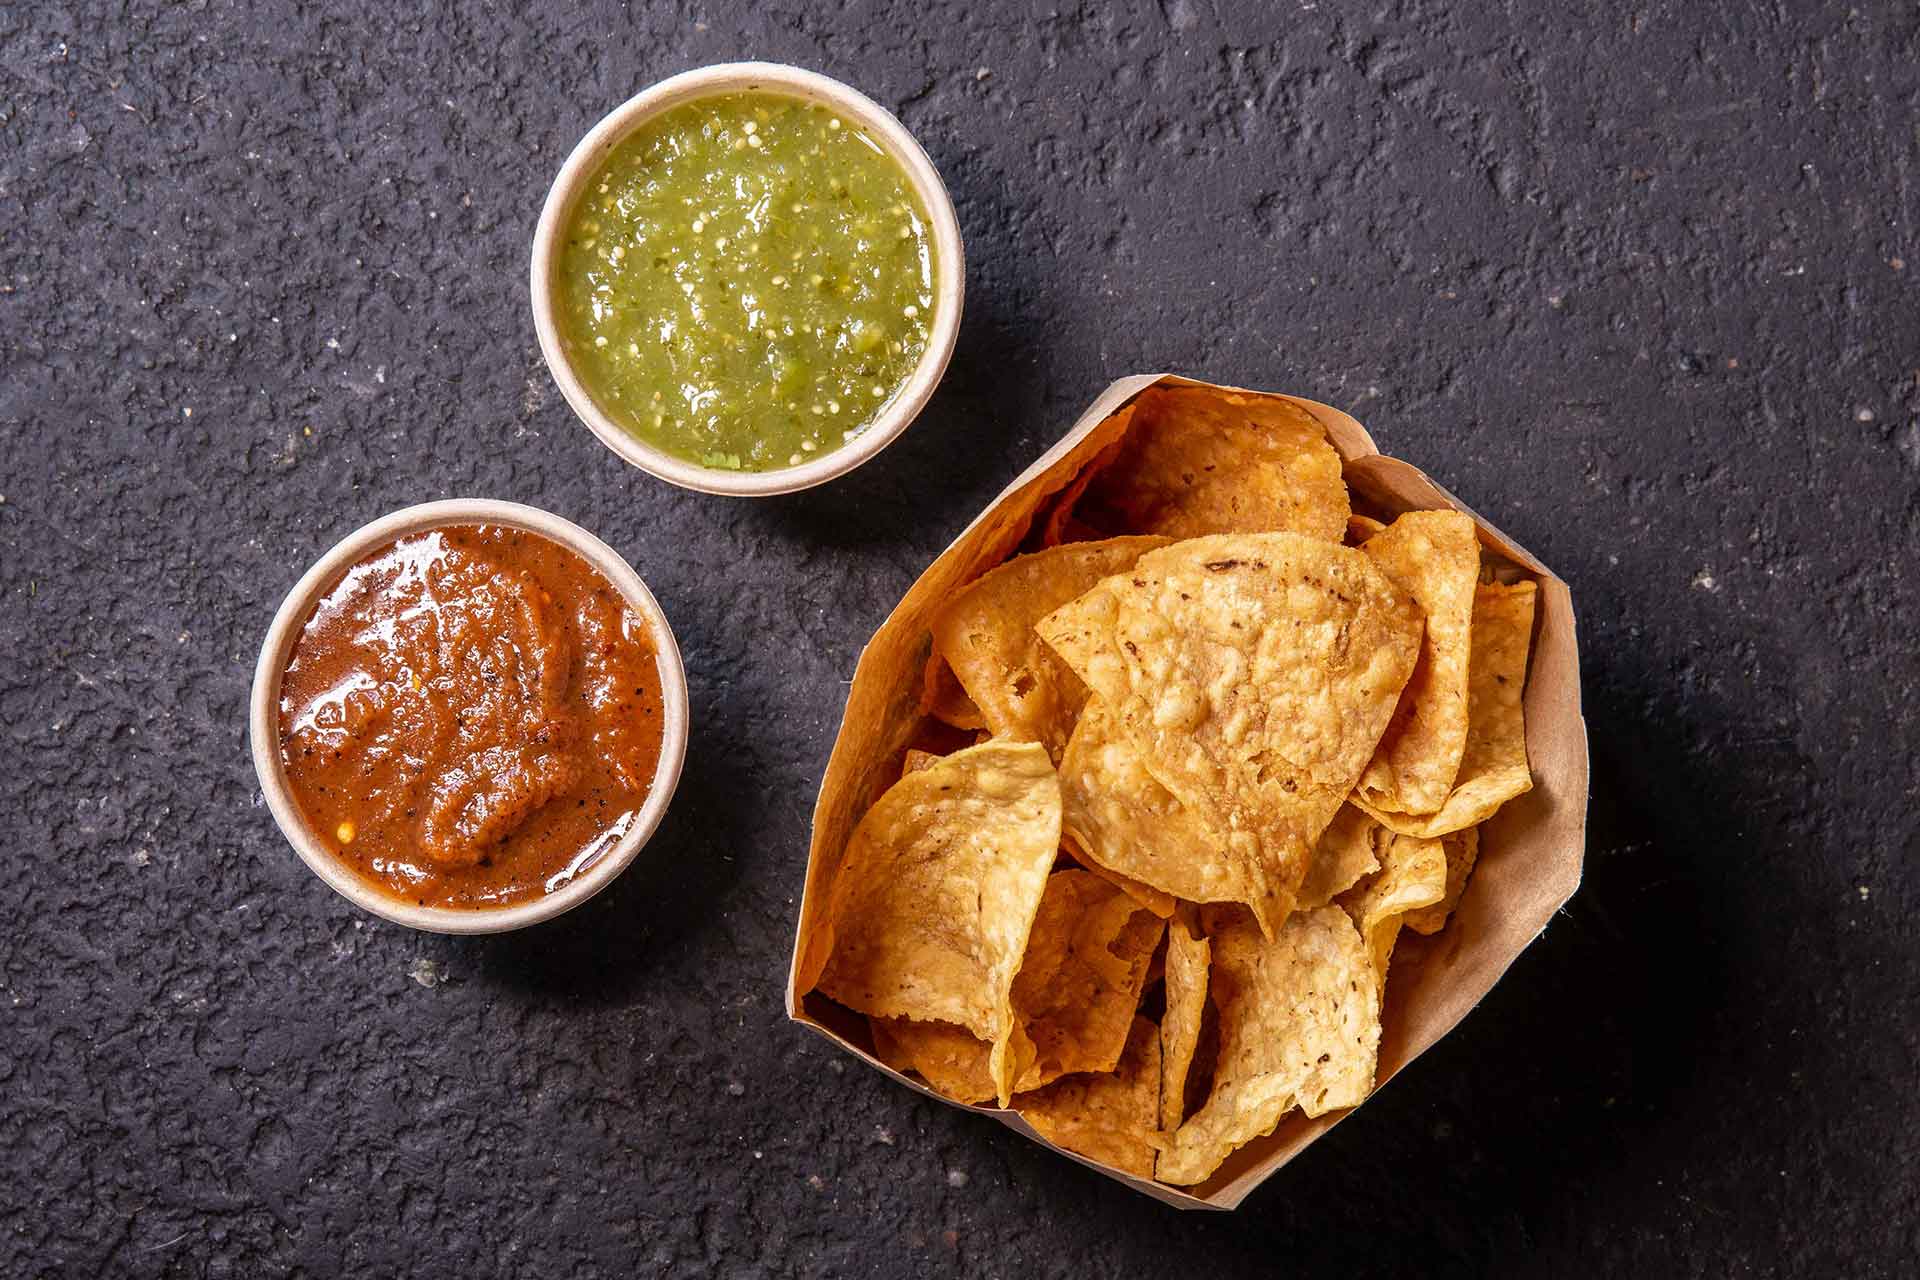 Chips and Salsa - Lightly salted tortilla chips with your choice of mild green or spicy red salsa.